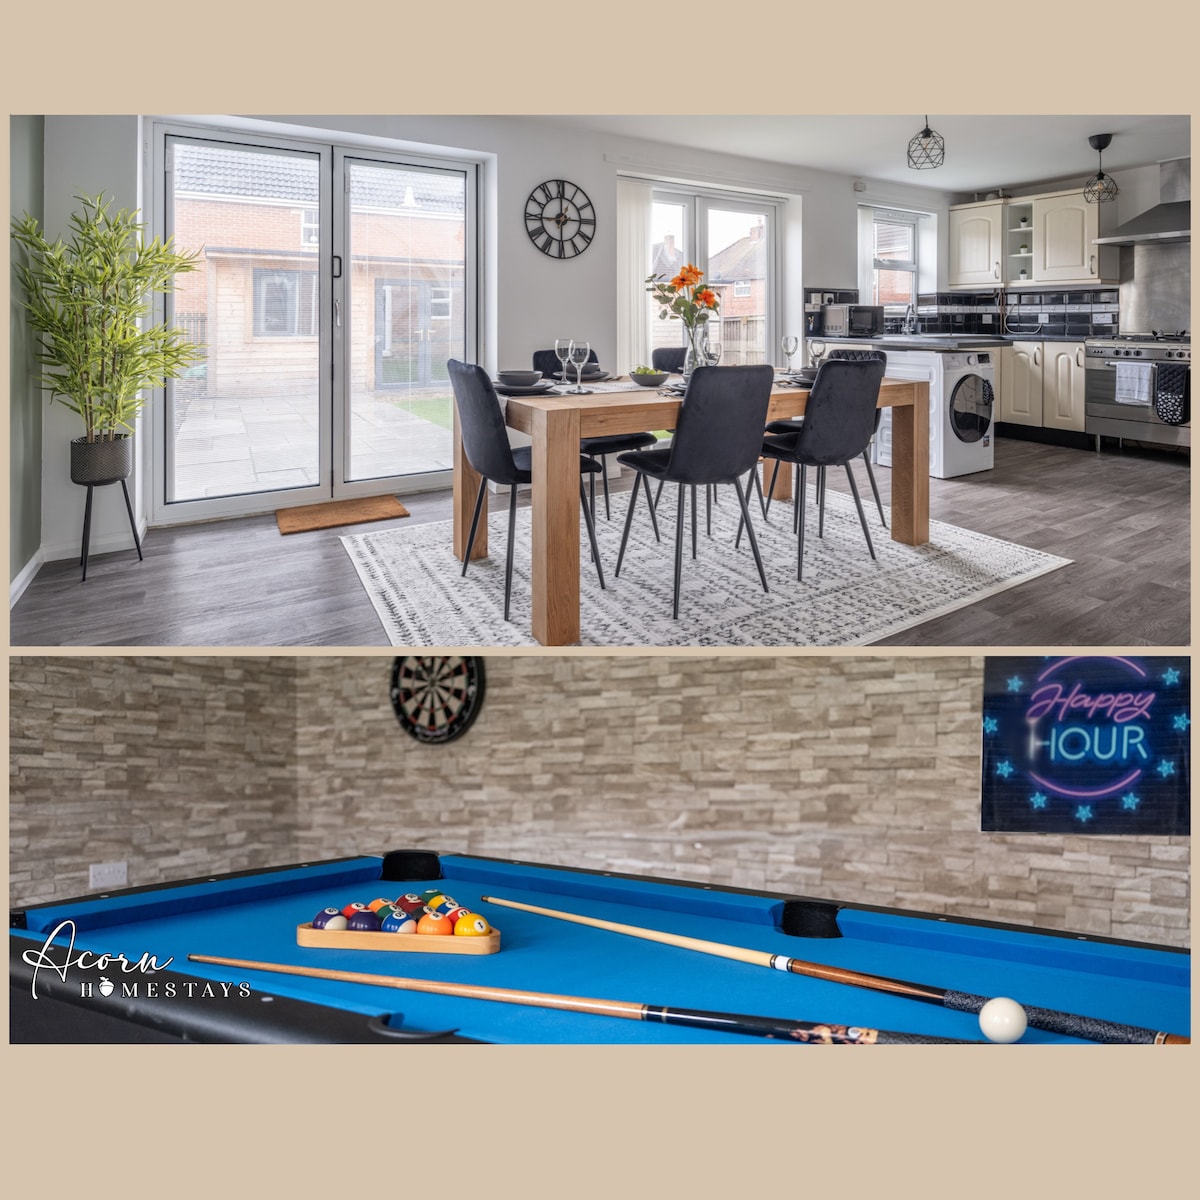 3bd WiFi/parking | Monthly discounts | Games Room